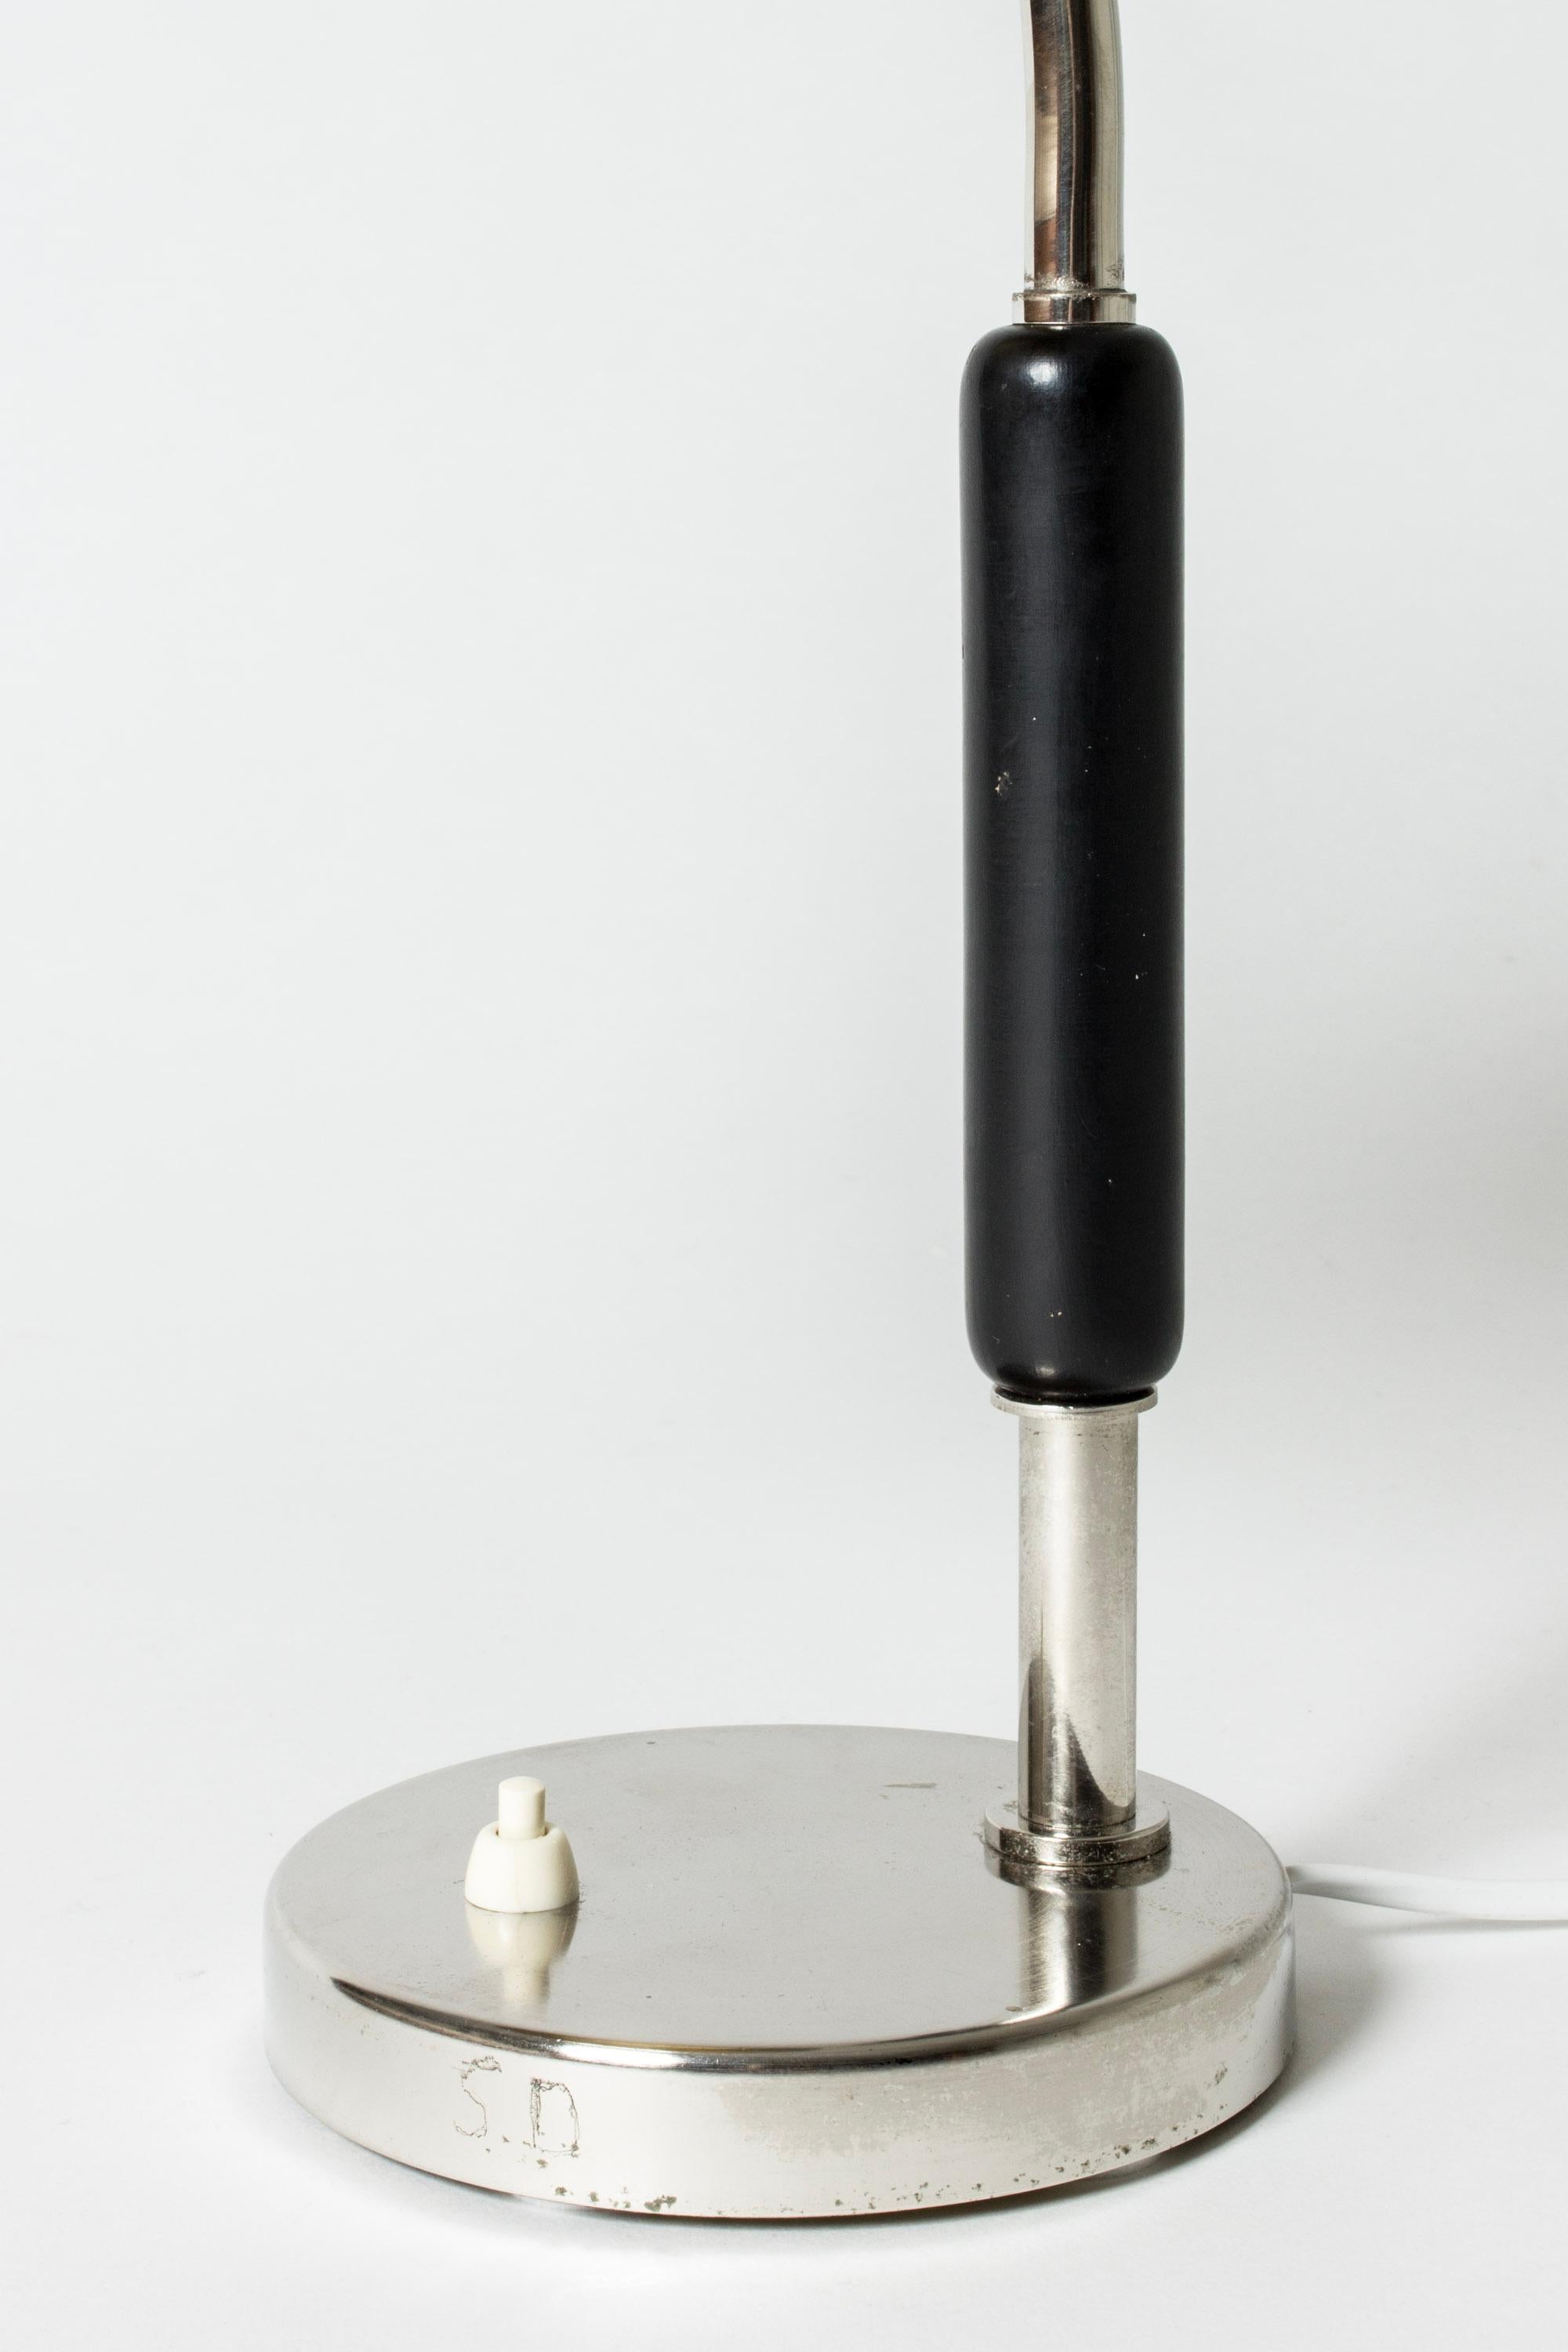 Vintage Functionalist Table or Desk Lamp from ASEA, Sweden, 1930s For Sale 1